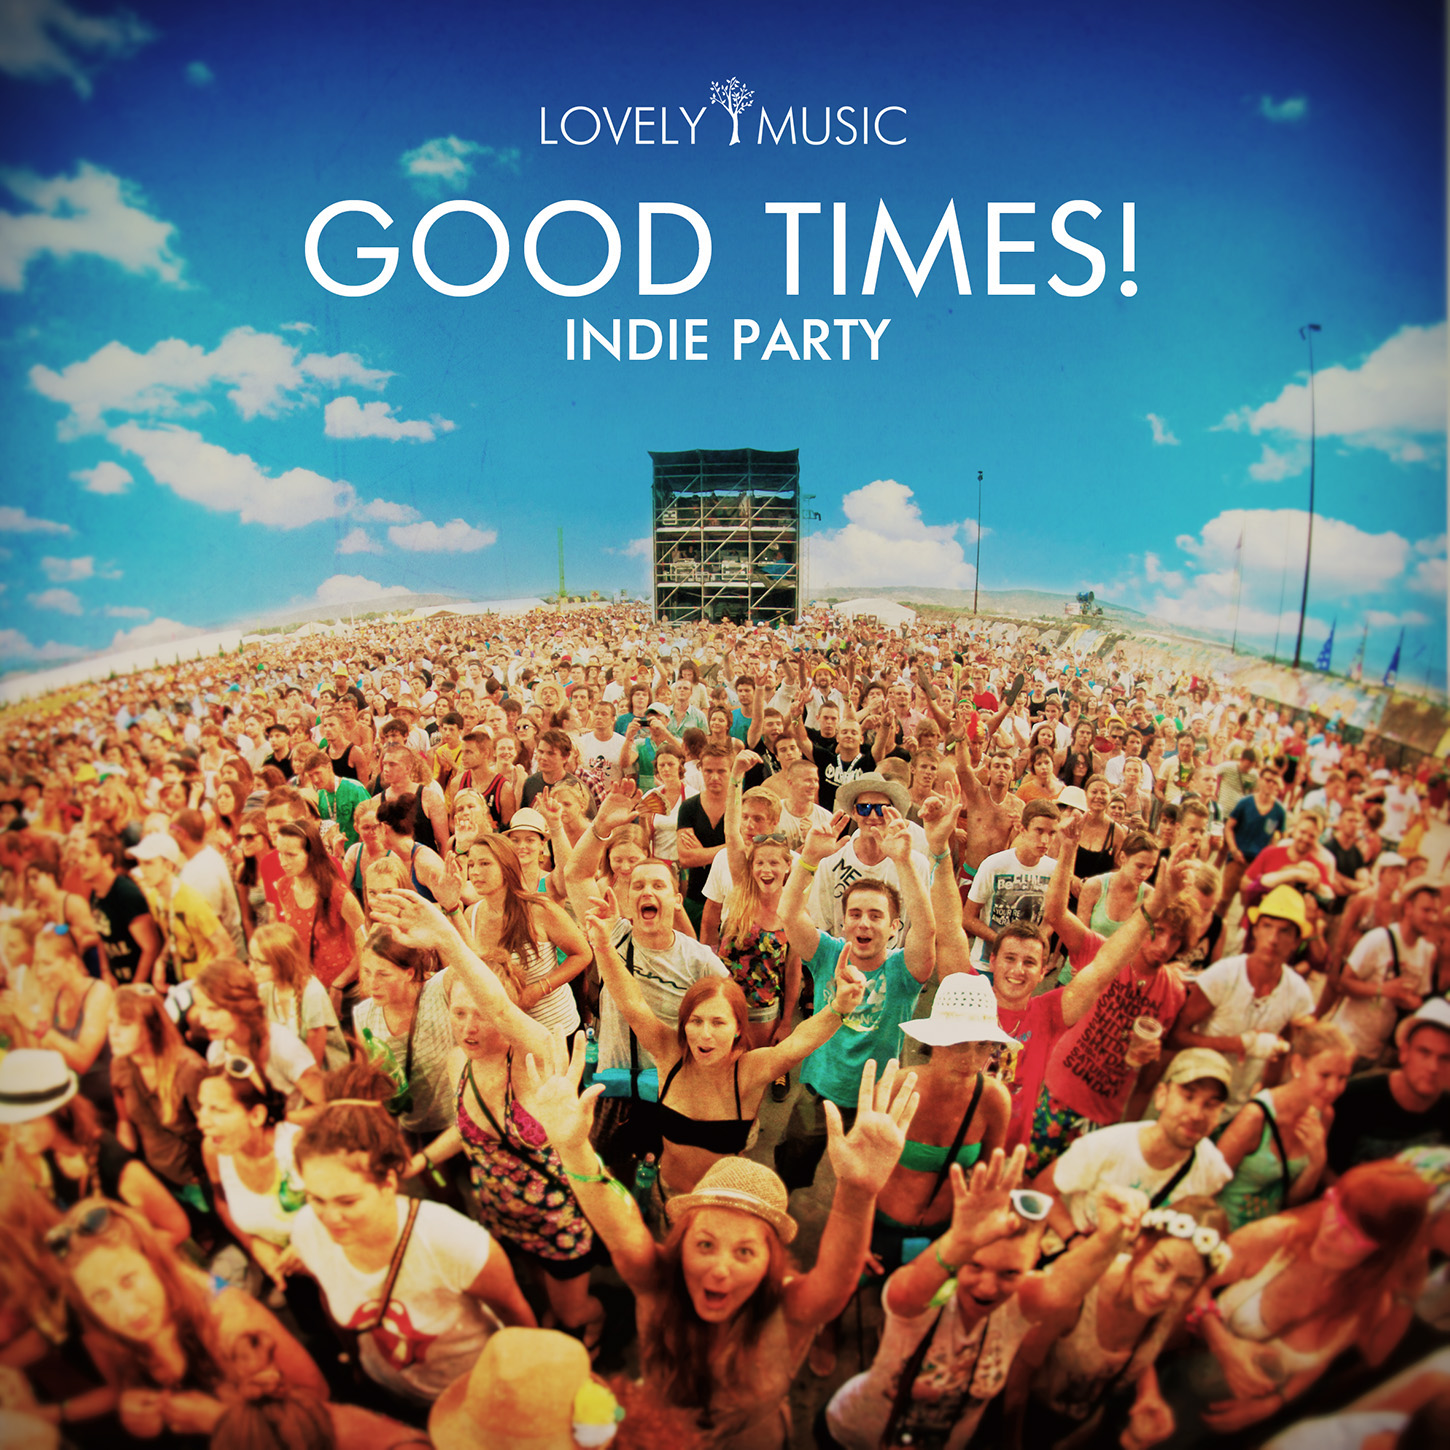 Love this music. Lovely Music. Celebrate the good times.